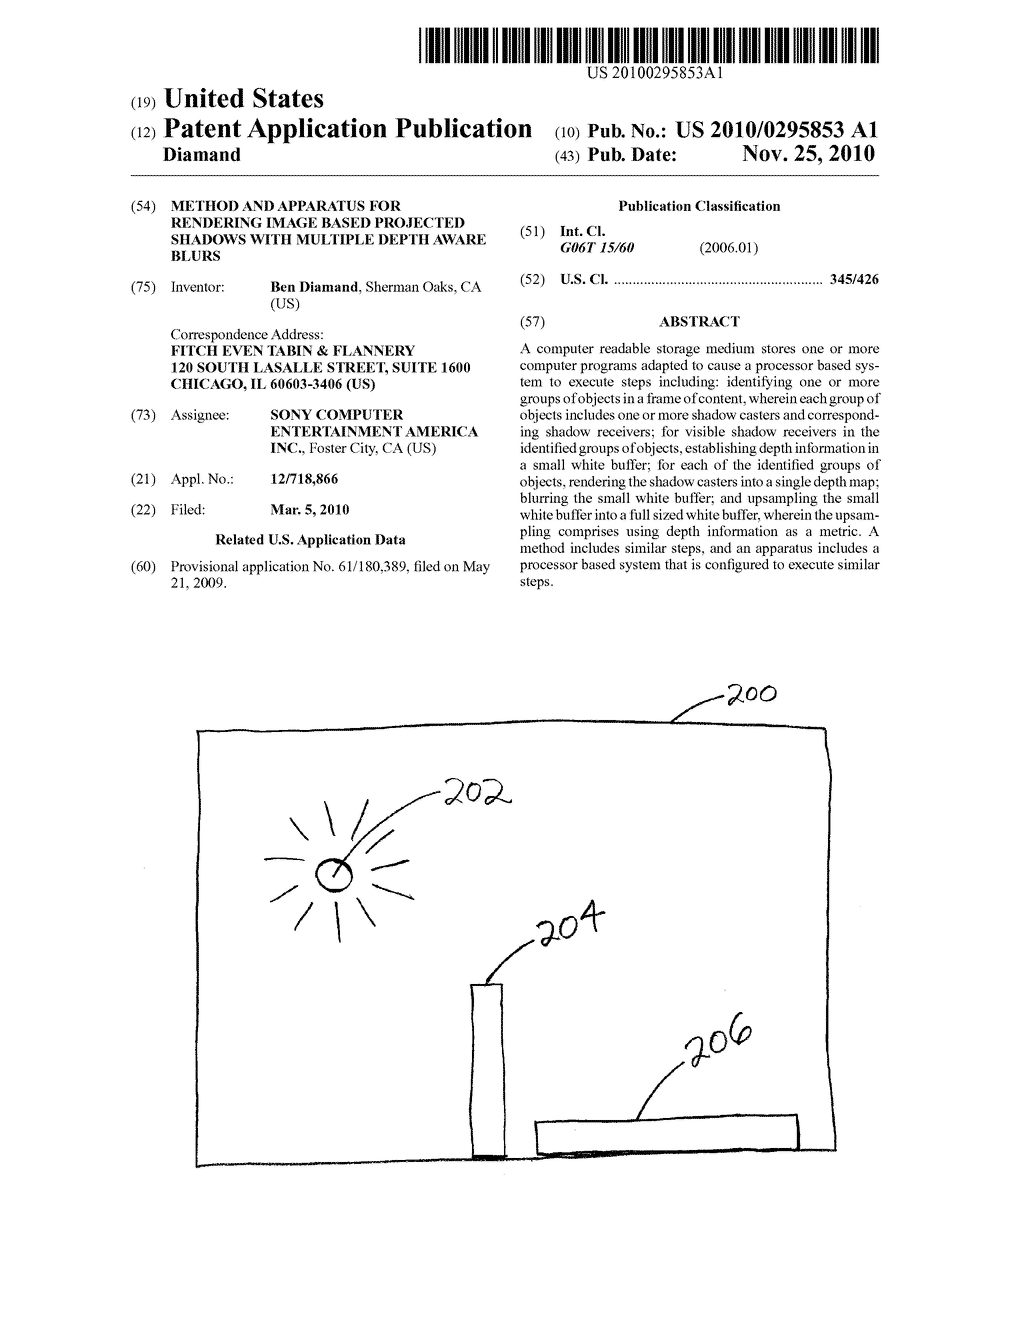 METHOD AND APPARATUS FOR RENDERING IMAGE BASED PROJECTED SHADOWS WITH MULTIPLE DEPTH AWARE BLURS - diagram, schematic, and image 01